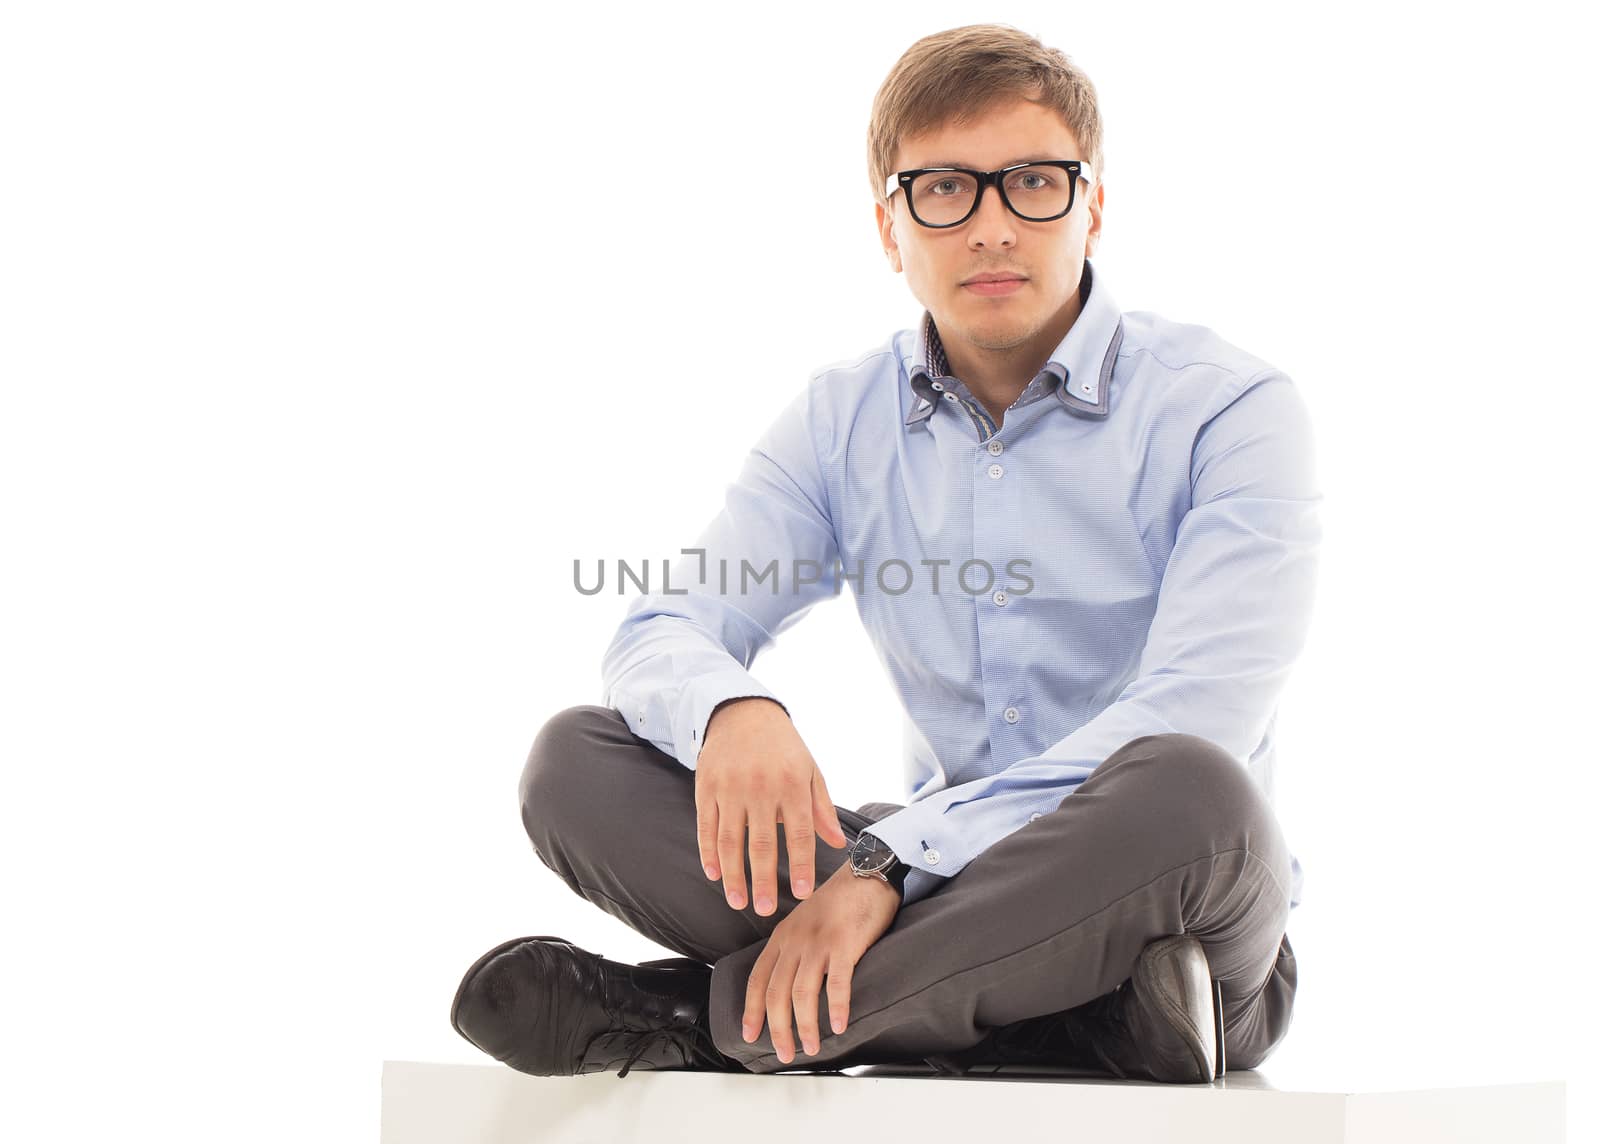 Handsome man in a shirt and trousers is sitting on a cube